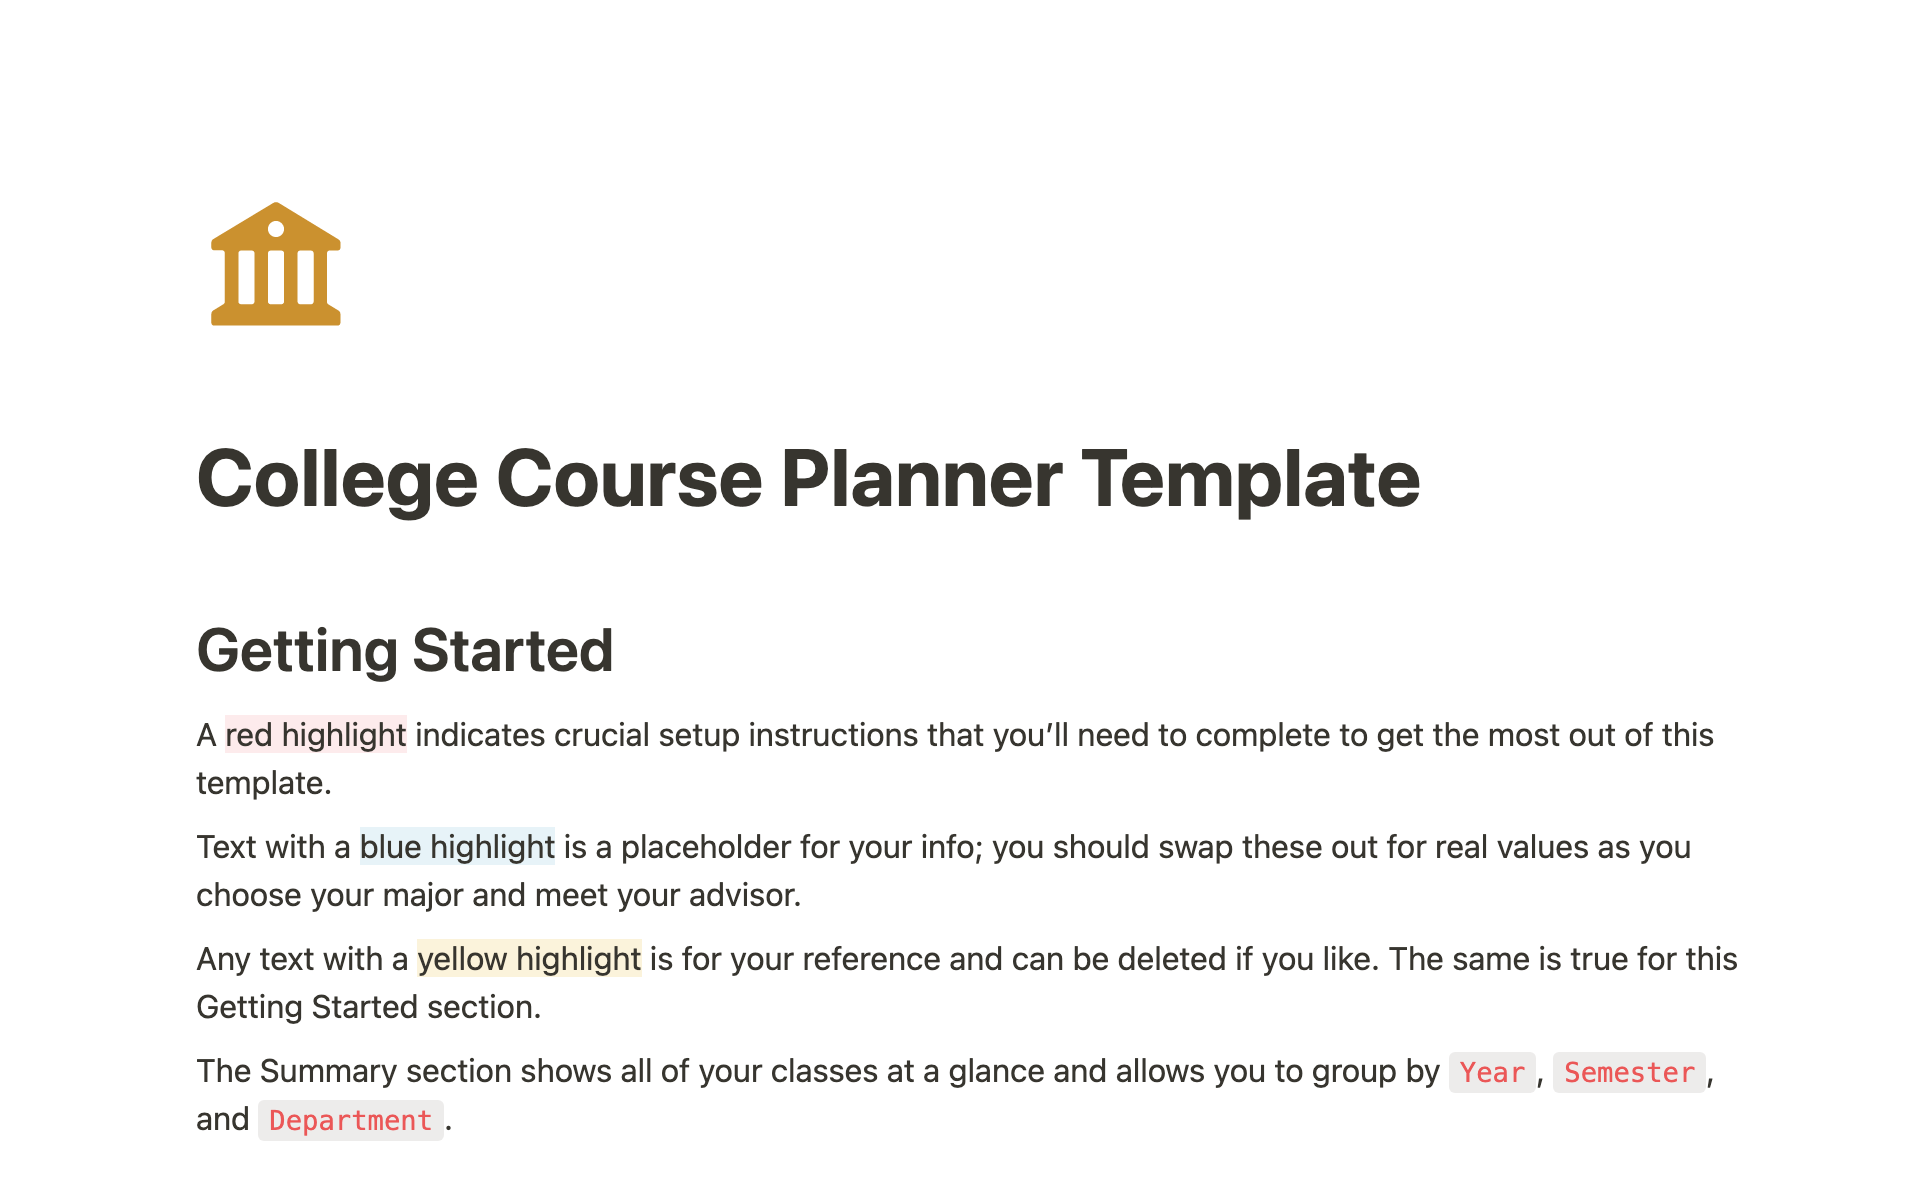 Helps college students plan and track their courses for their major(s) and minor(s).